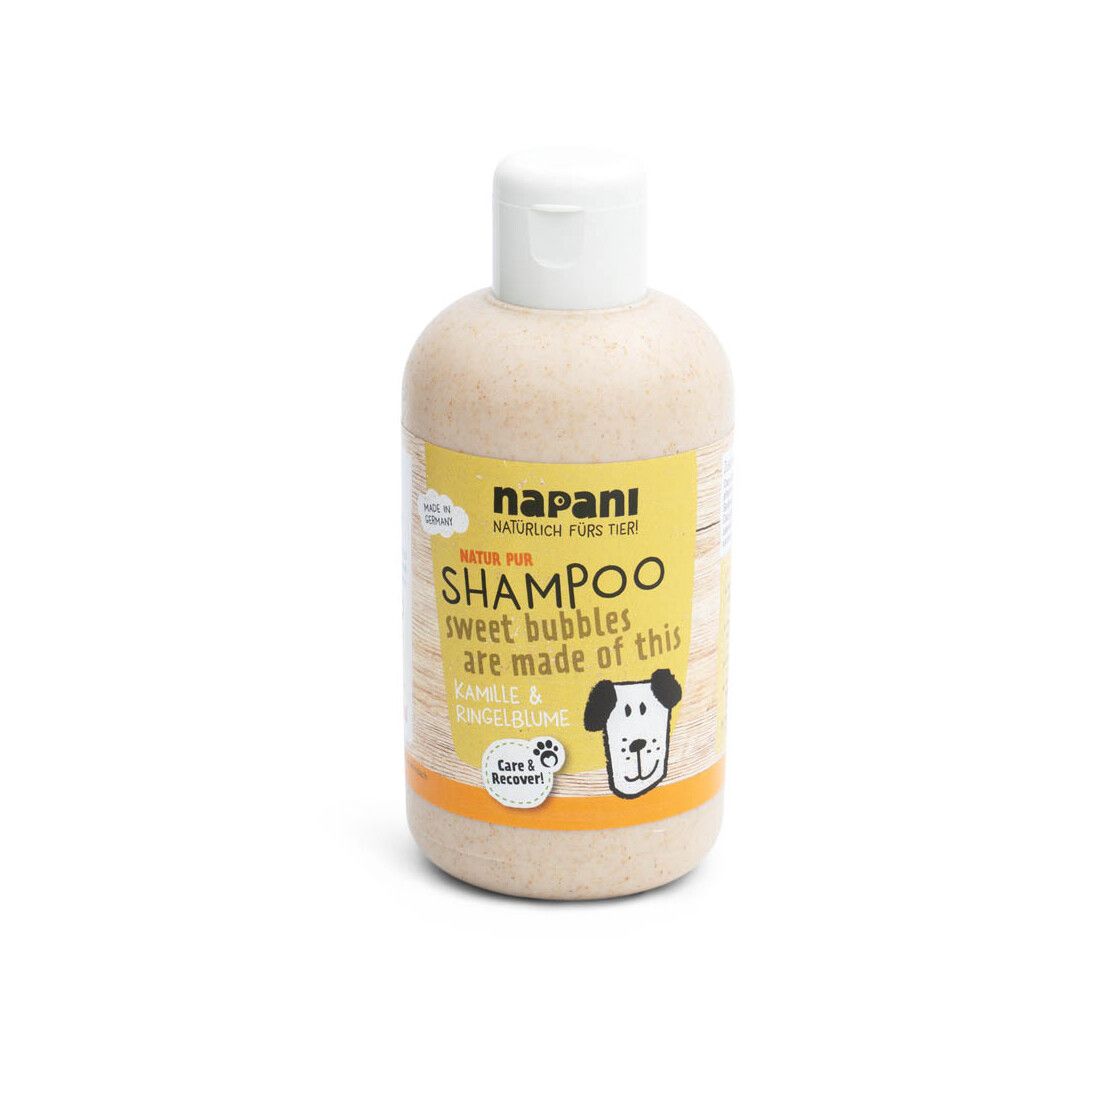 napani - Shampoo "sweet bubbles are made of this" für Hunde mit Ringelblume